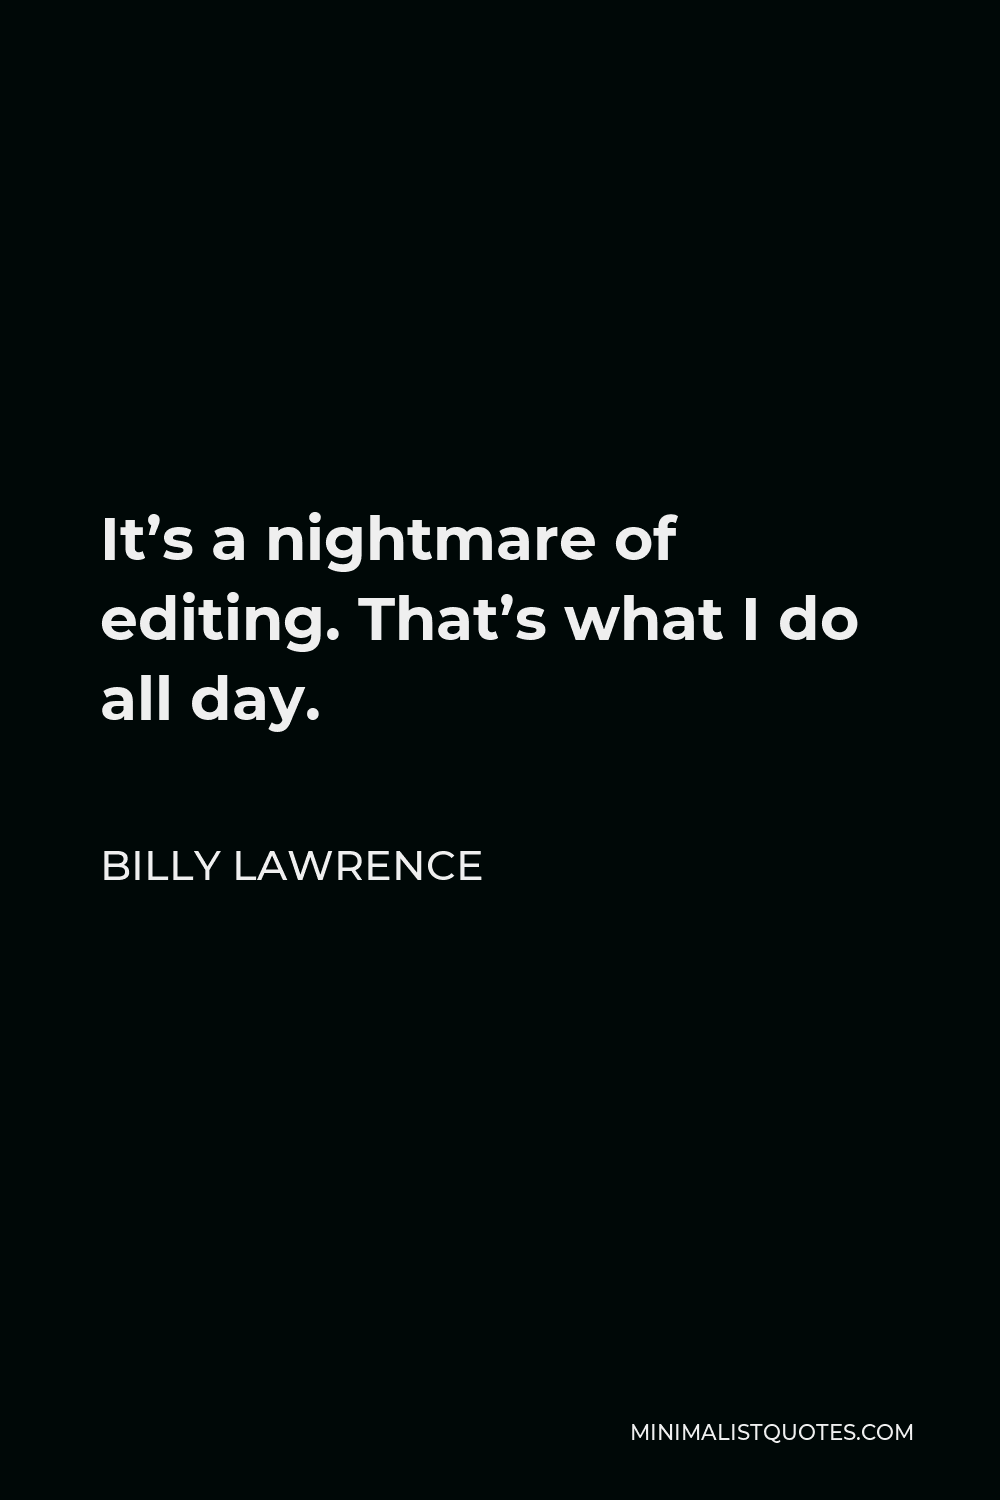 Billy Lawrence Quote - It’s a nightmare of editing. That’s what I do all day.